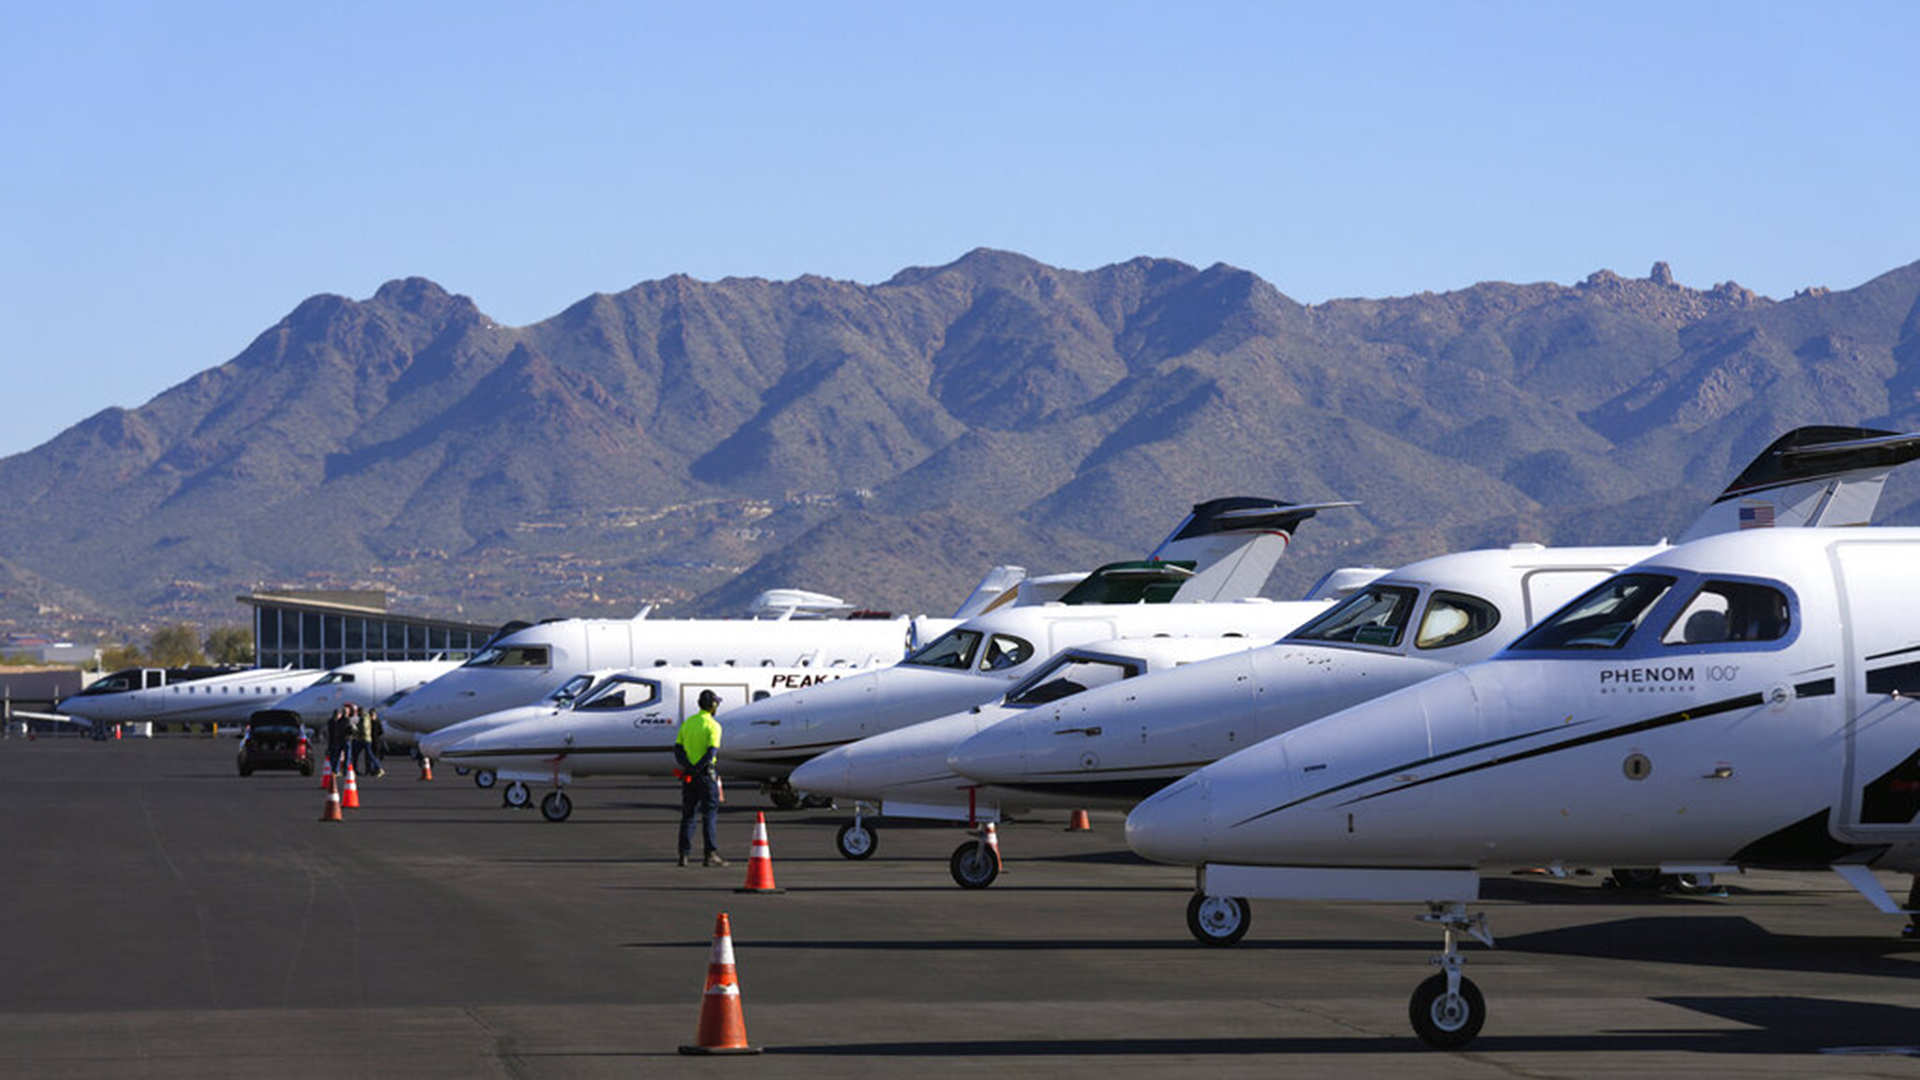 Private jets drive air traffic during NFL championship each year.